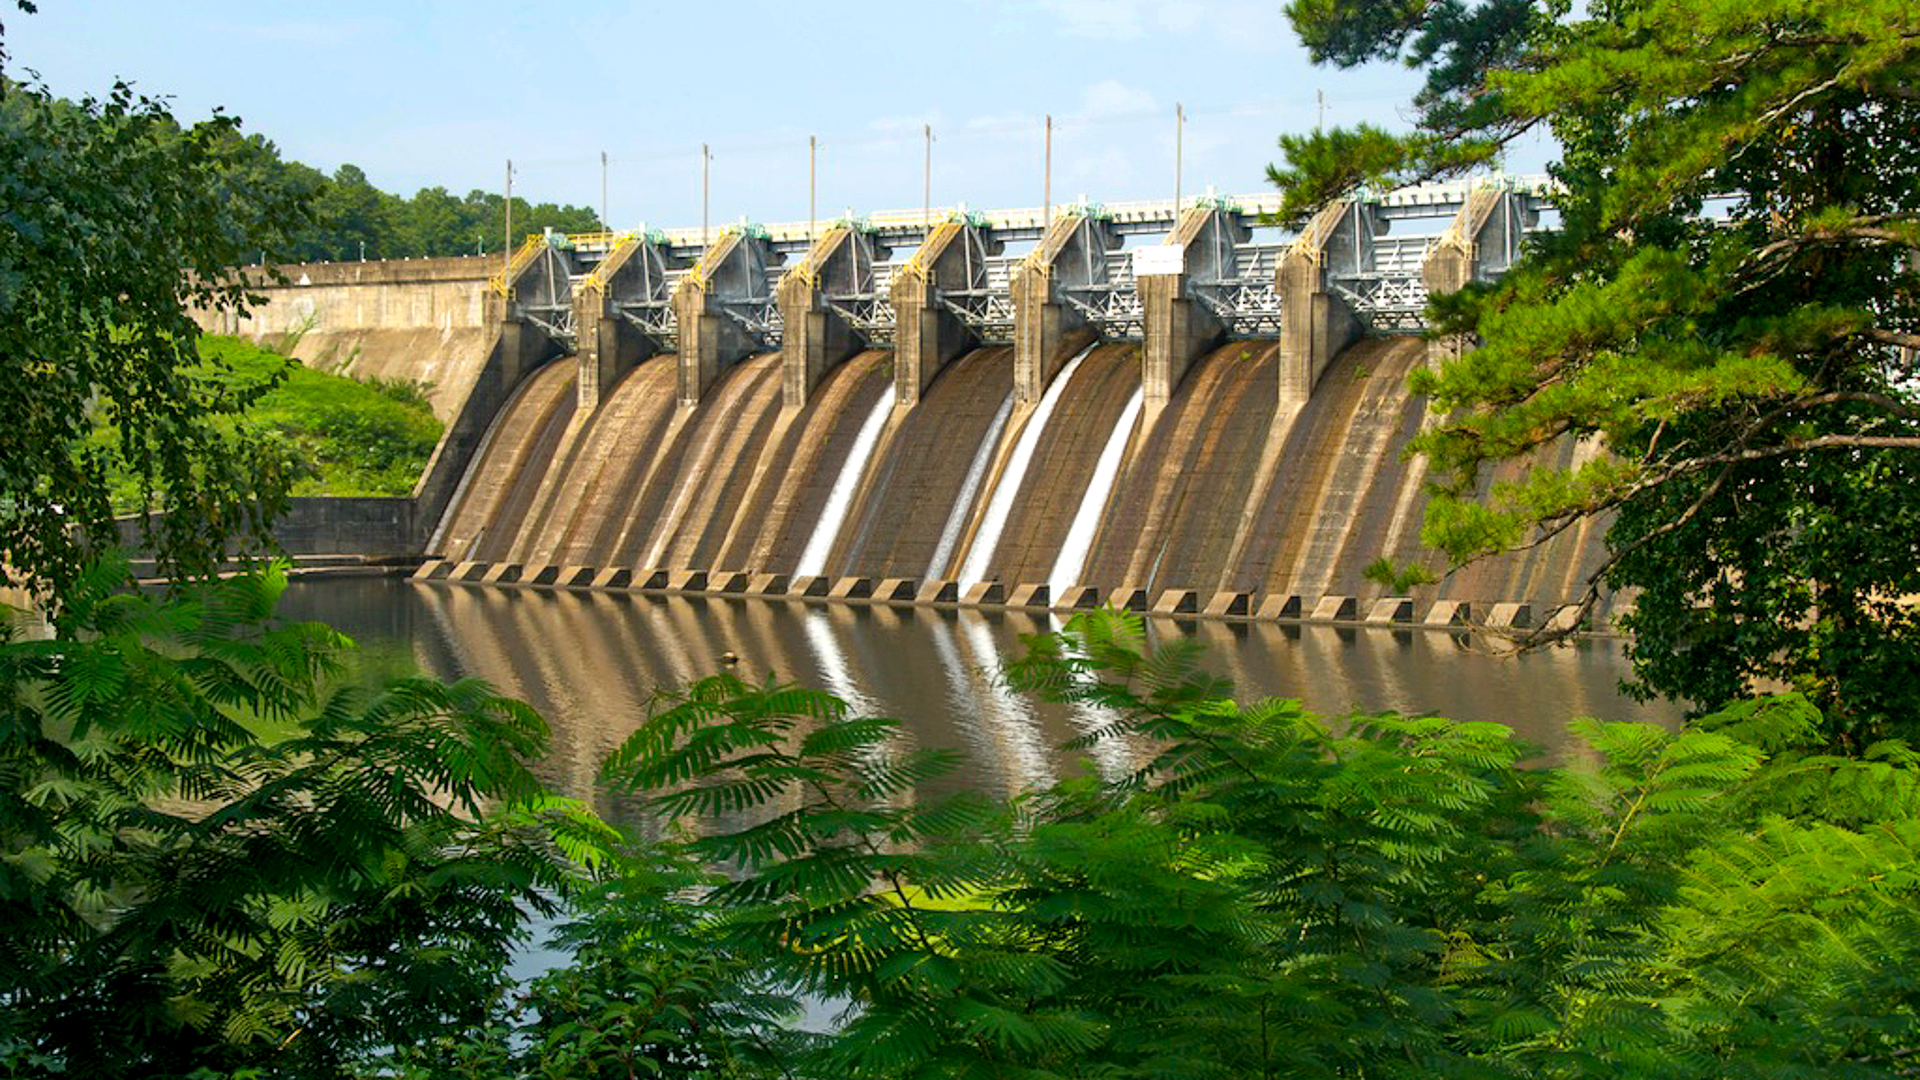 Carpenter Dam has been generating electricity for Entergy Arkansas customers since 1931.